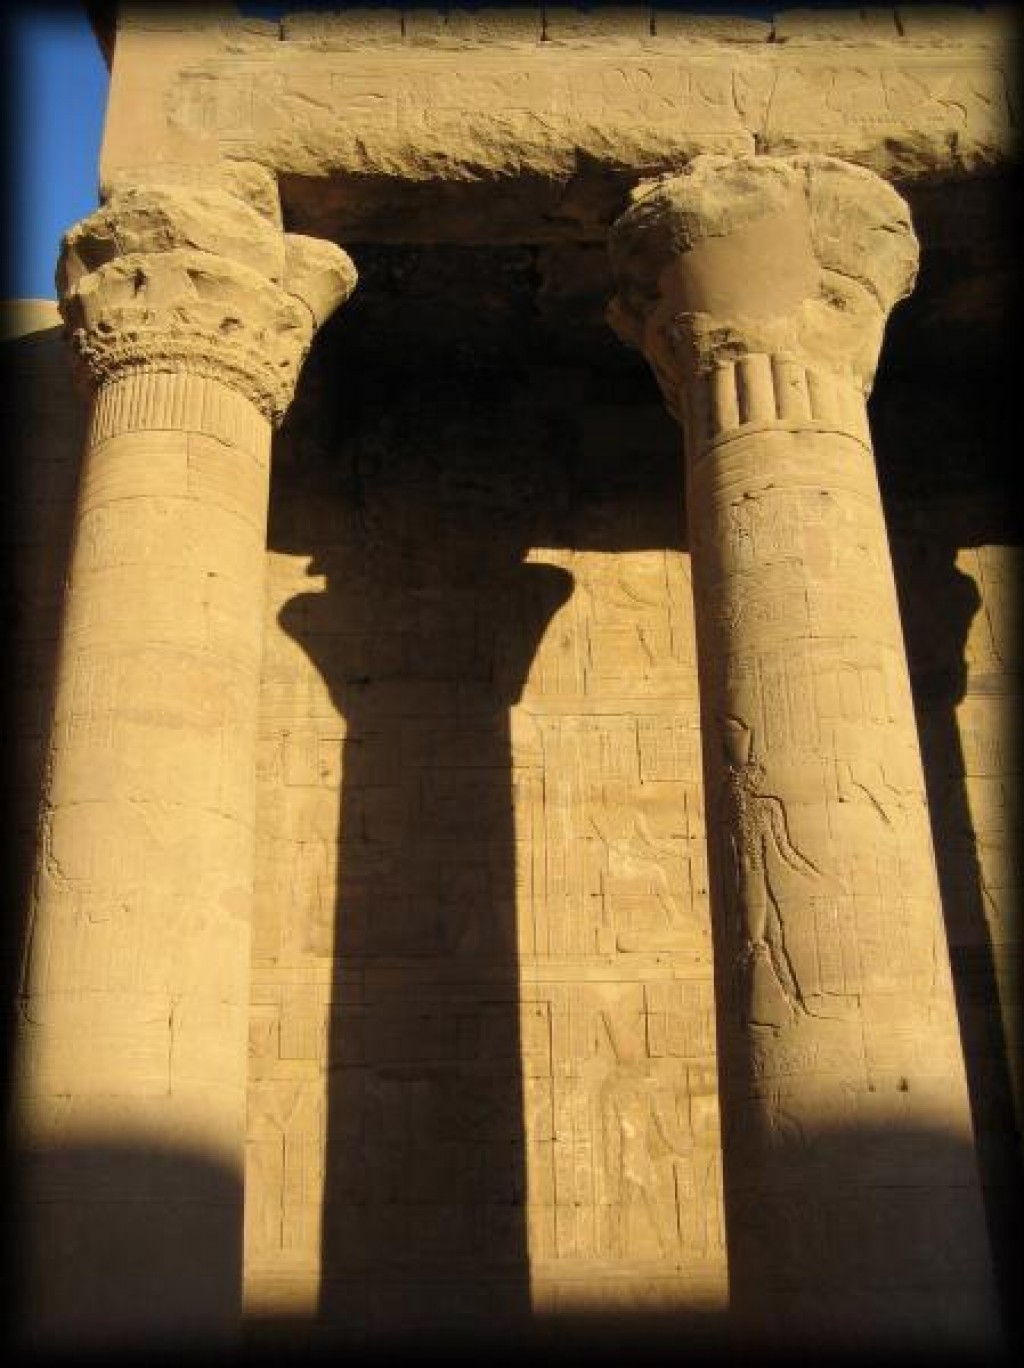 Between Aswan and Luxor is located the major Ptolemaic temple of Edfu - the best preserved major temple in Egypt. The temple is dedicated to the falcon god Horus and was built over a 180-year period from 237 BC to 57 BC. 
